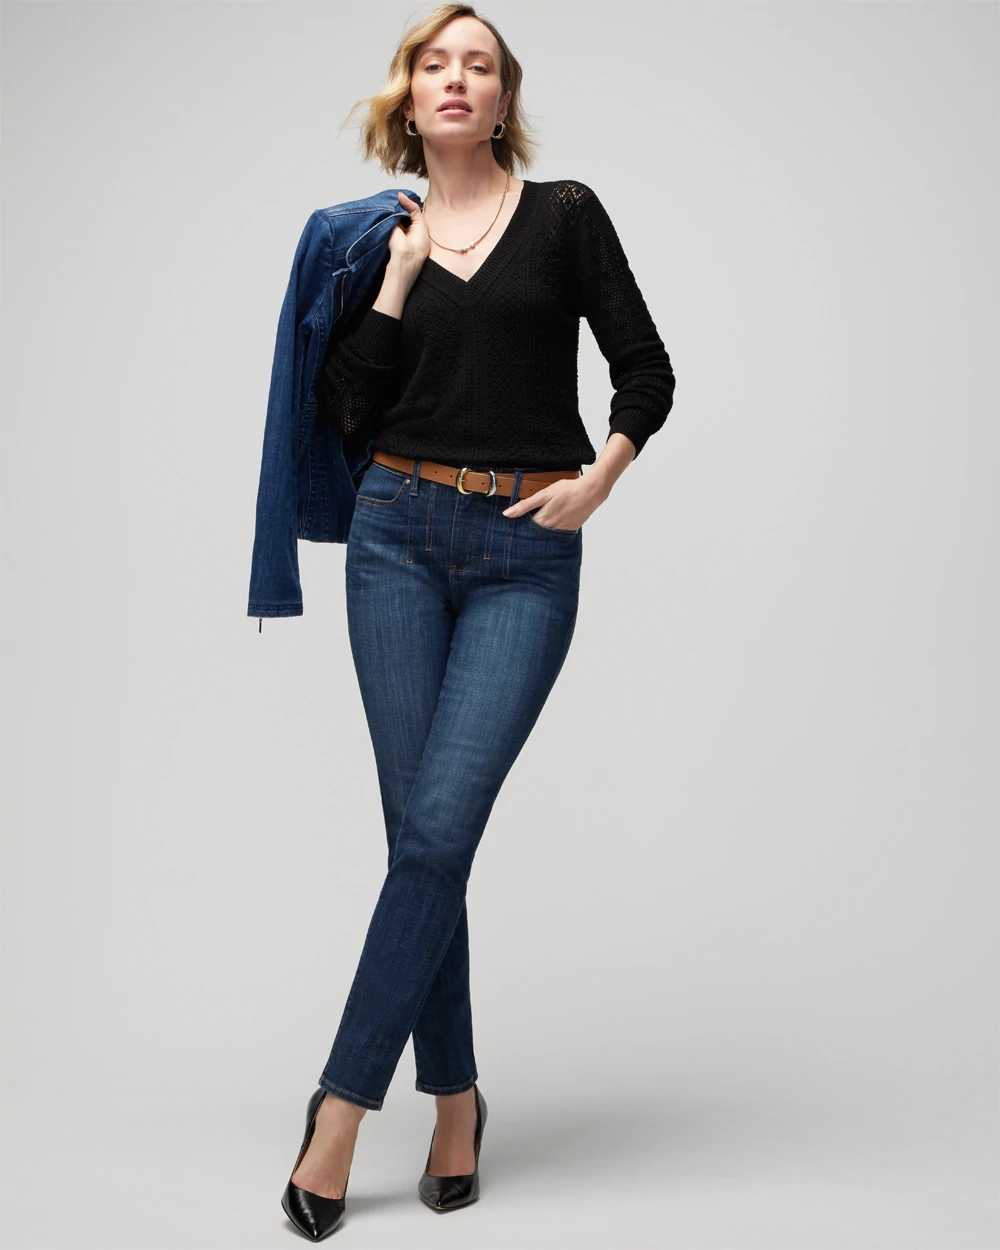 High-Rise Everyday Soft Denim  Darts Slim Ankle Jeans click to view larger image.